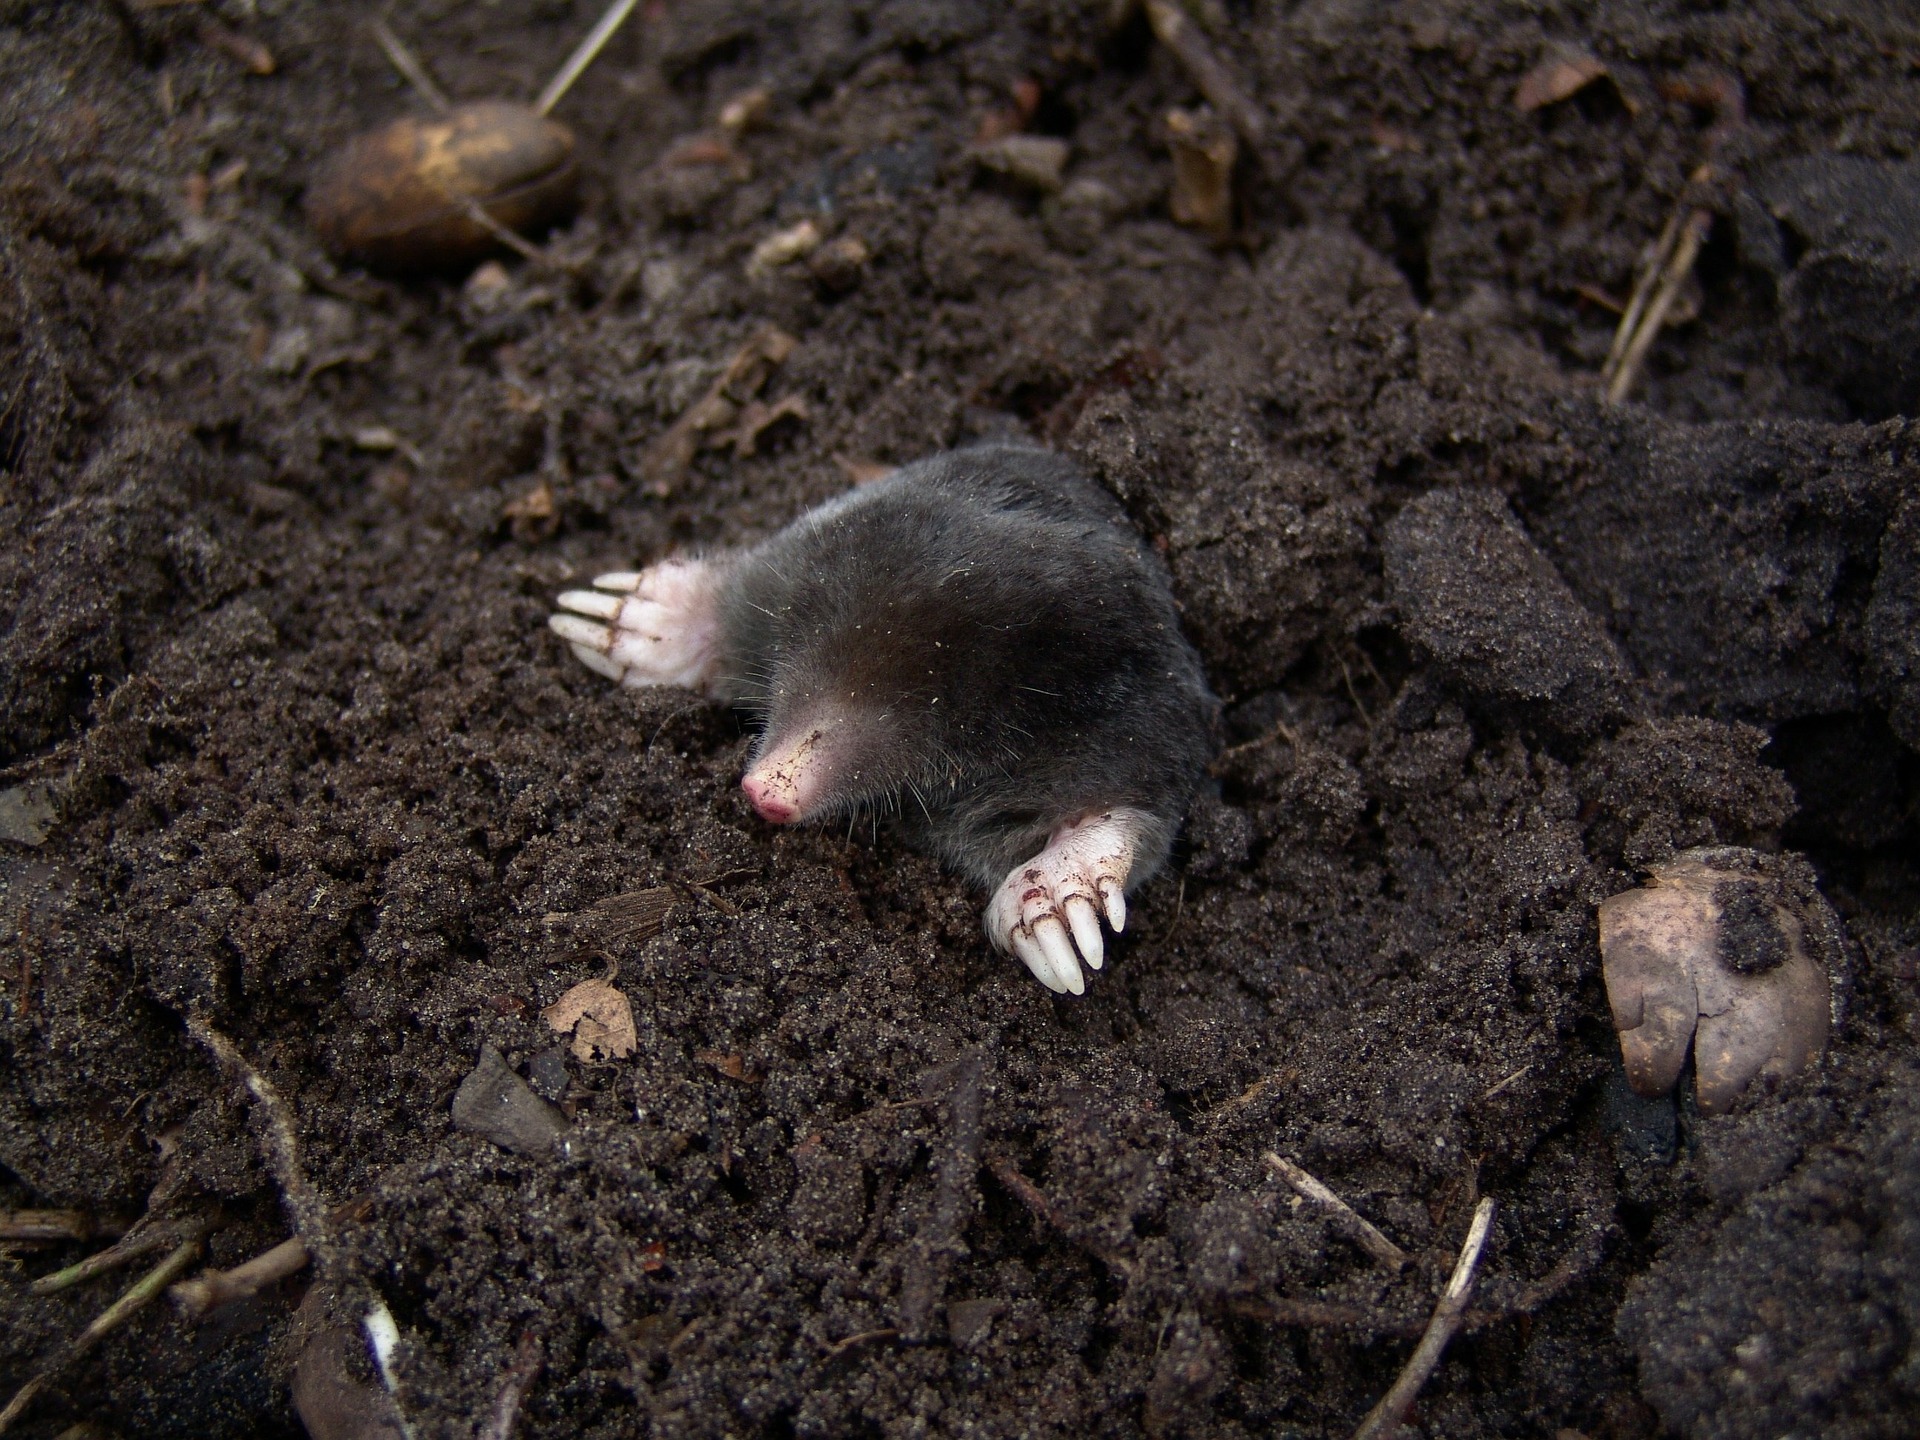 effective methods to eliminate moles and gophers a complete guide